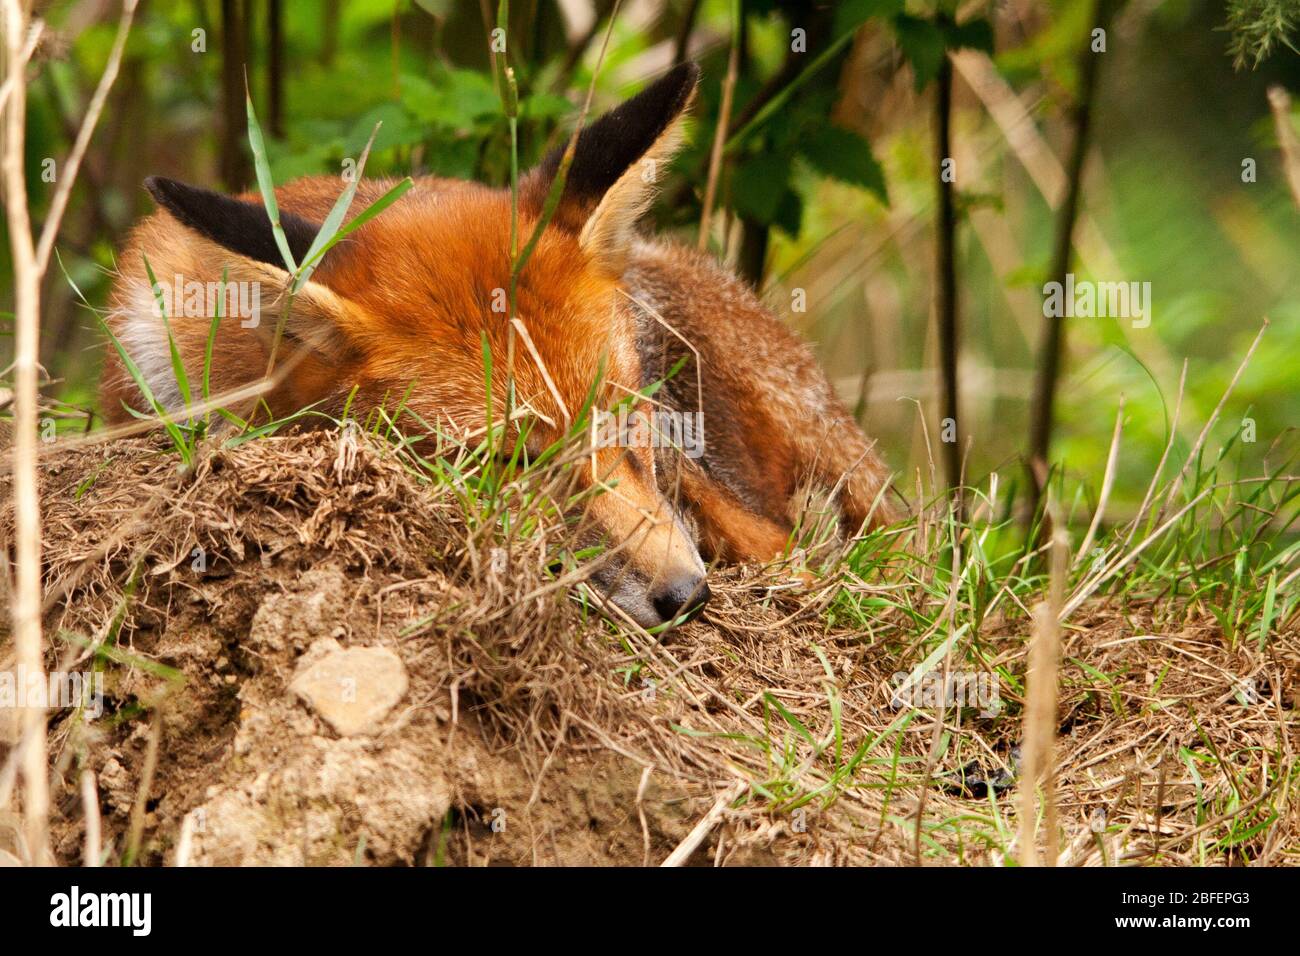 Fox Vulpes vulpes red fur white underside throat chin and inside ears black on ears and legs forward looking eyes dog like pointed  muzzle resting Stock Photo